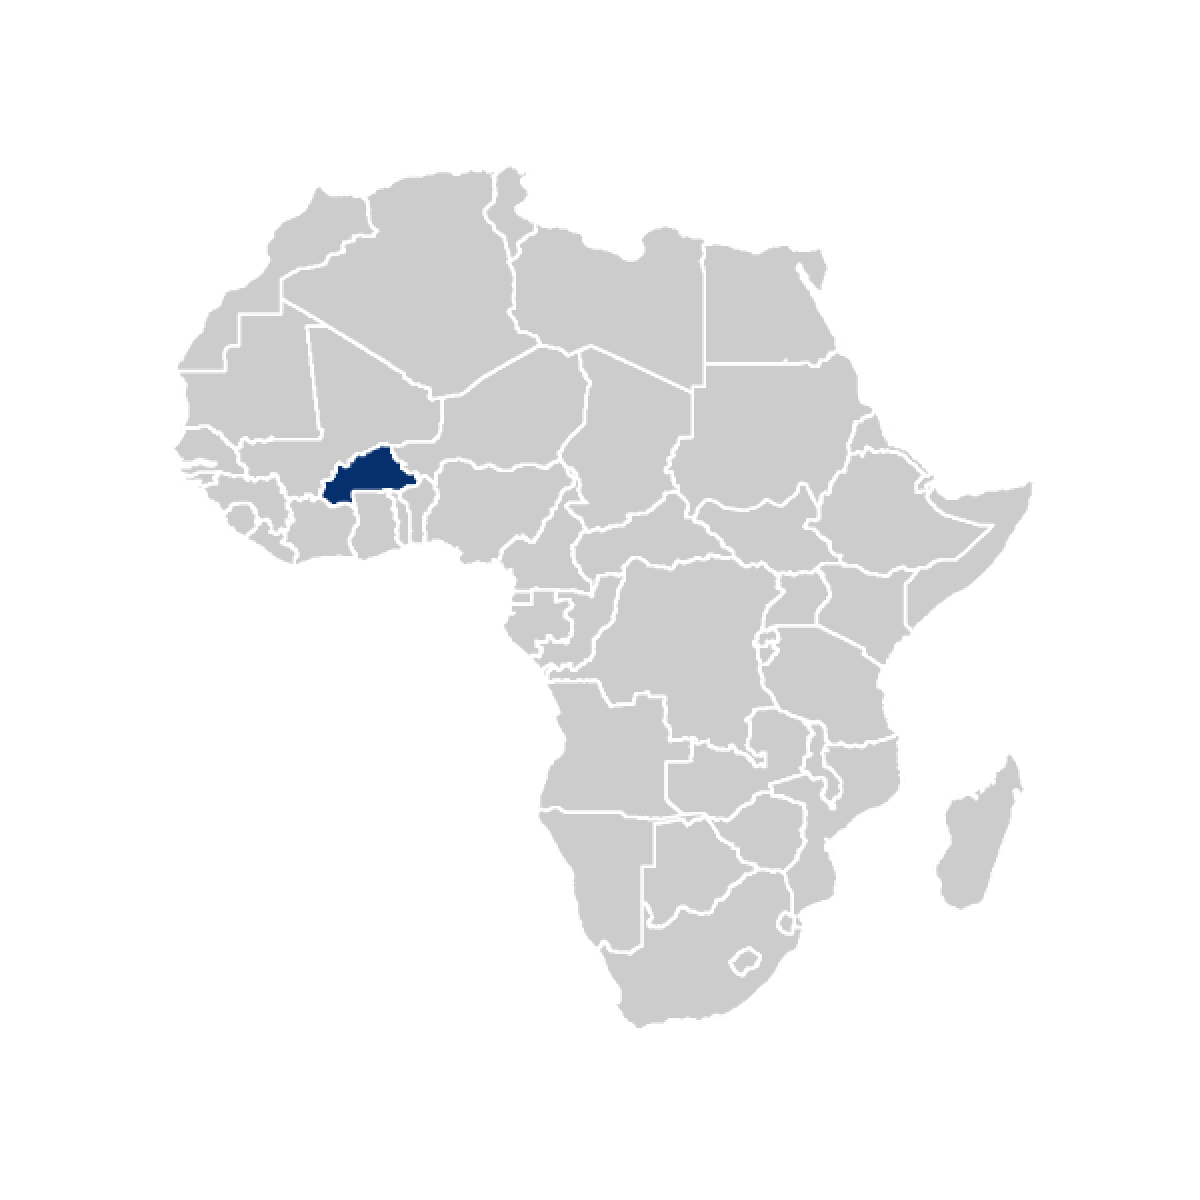 Burkina Faso highlighted in map of Africa